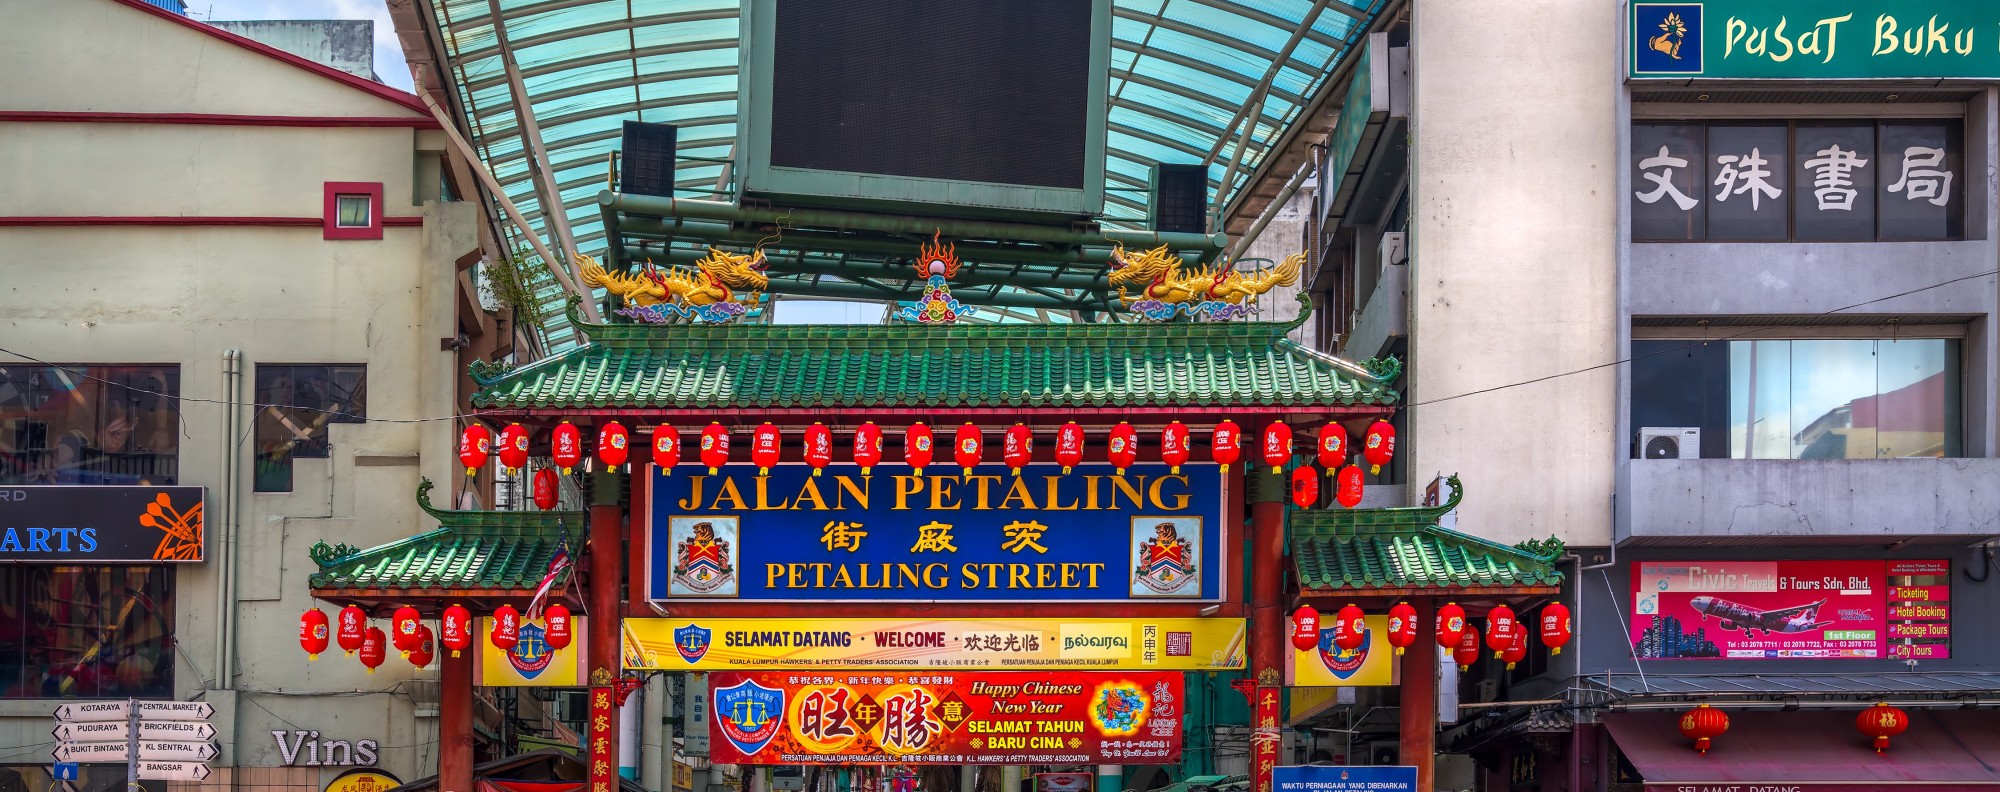 Petaling Street The Chinatown Of Malaysia S Capital Bets On Its Heritage For A Modern Revival South China Morning Post